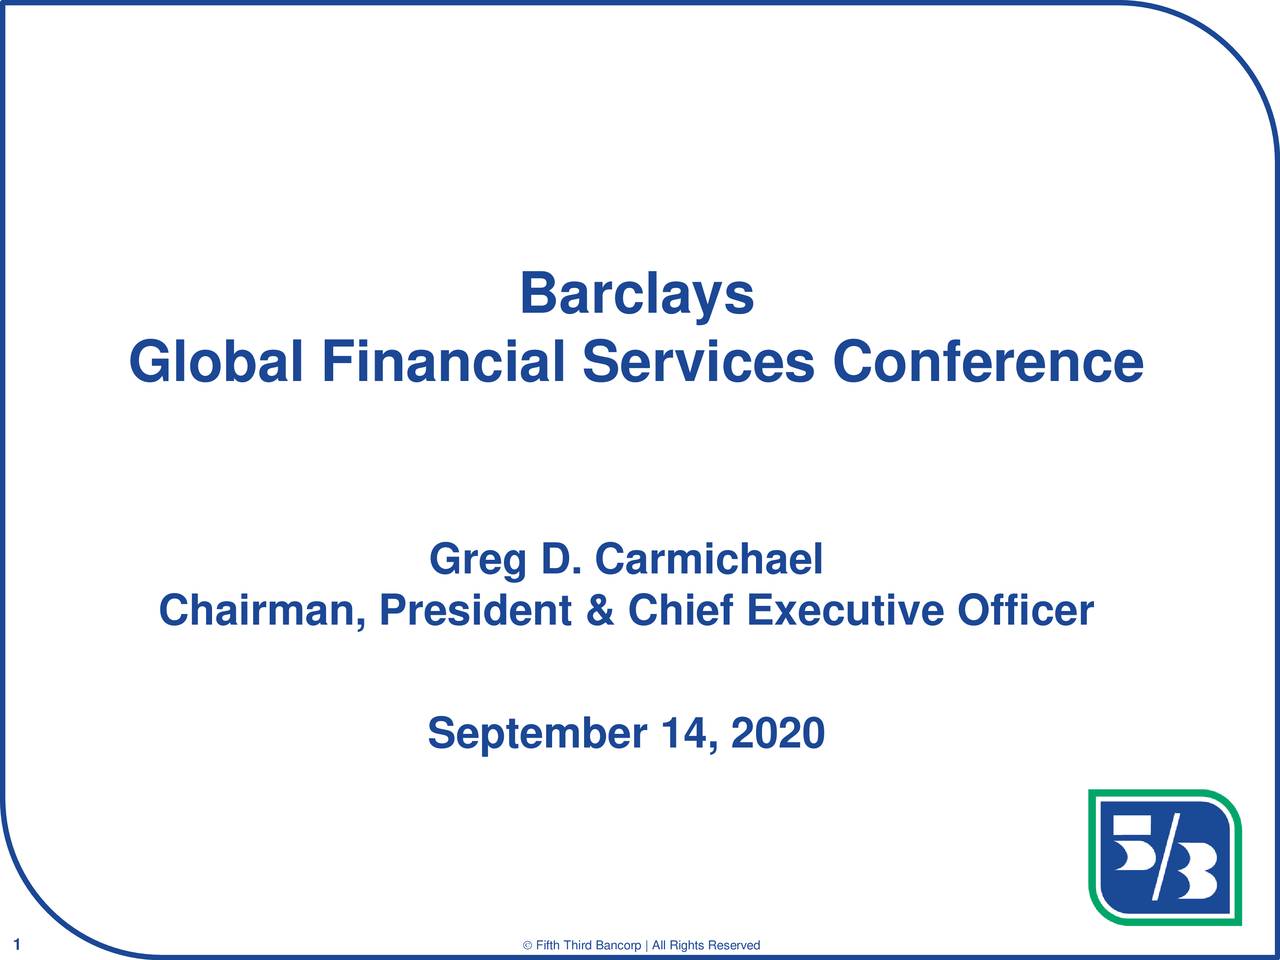 Fifth Third Bancorp Presents At Barclays Global Financial Services